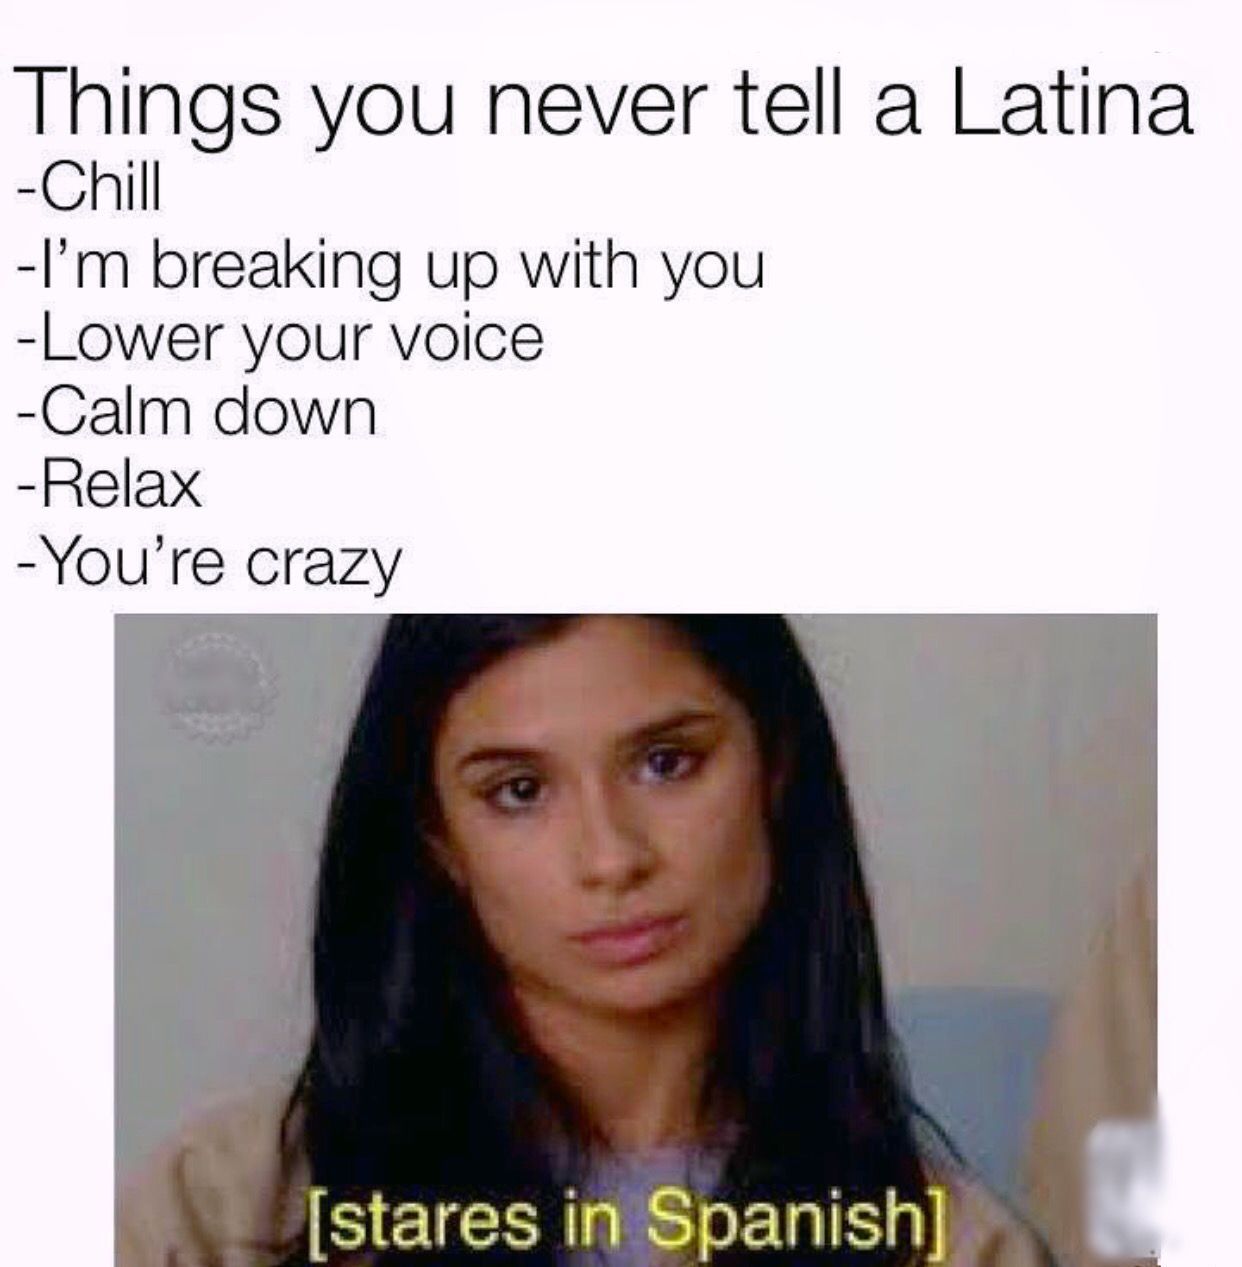 Things you never tell a Latina
-Chill
-I'm breaking up with you
-Lower your voice
-Calm down
-Relax
-You're crazy
[stares in Spanish]